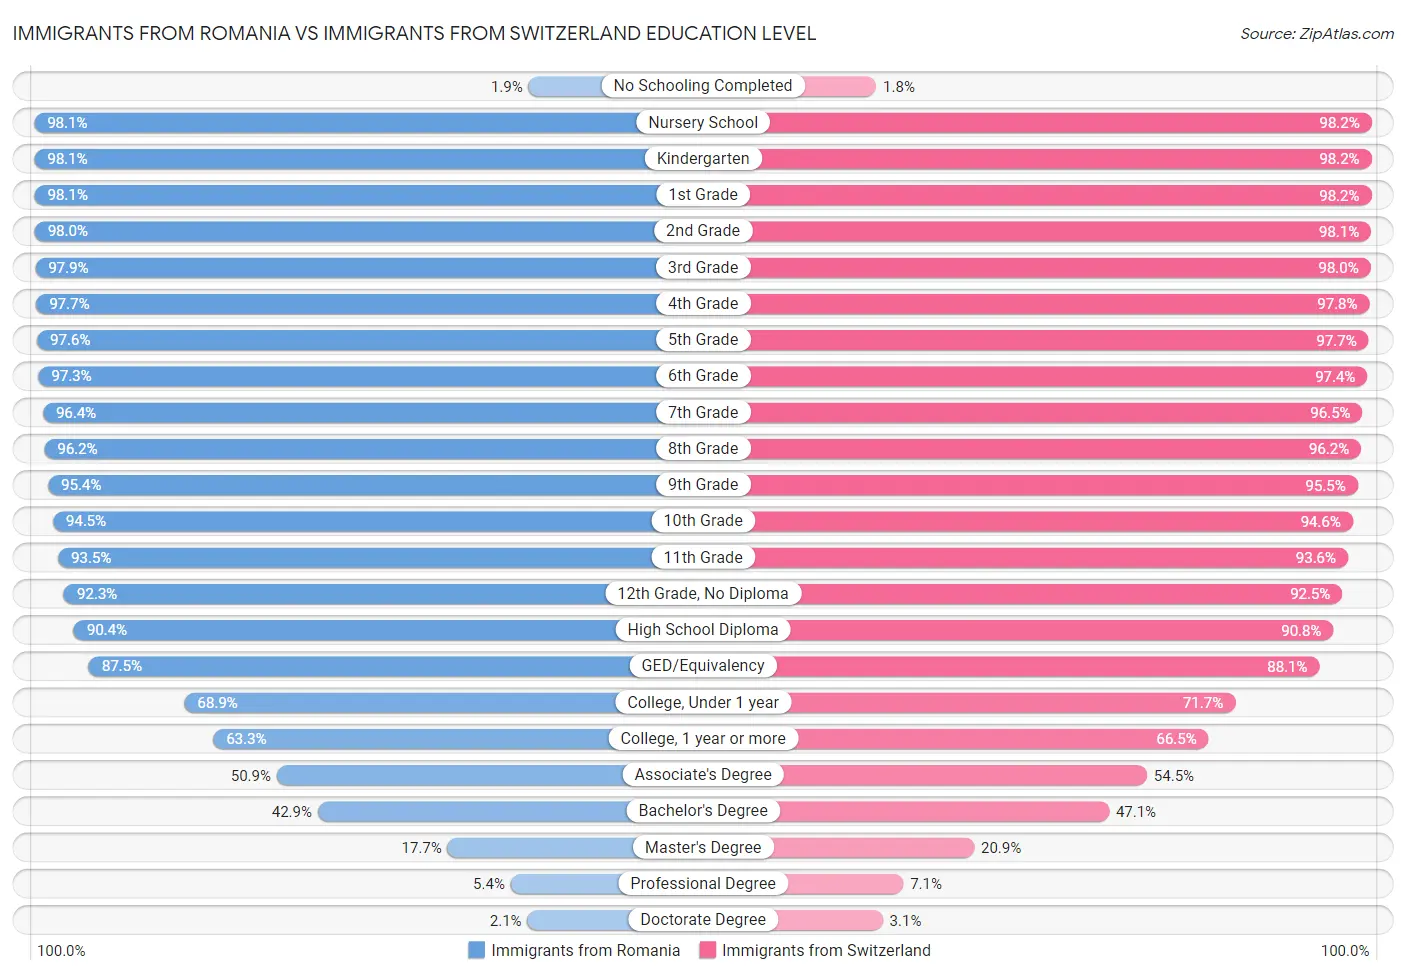 Immigrants from Romania vs Immigrants from Switzerland Education Level